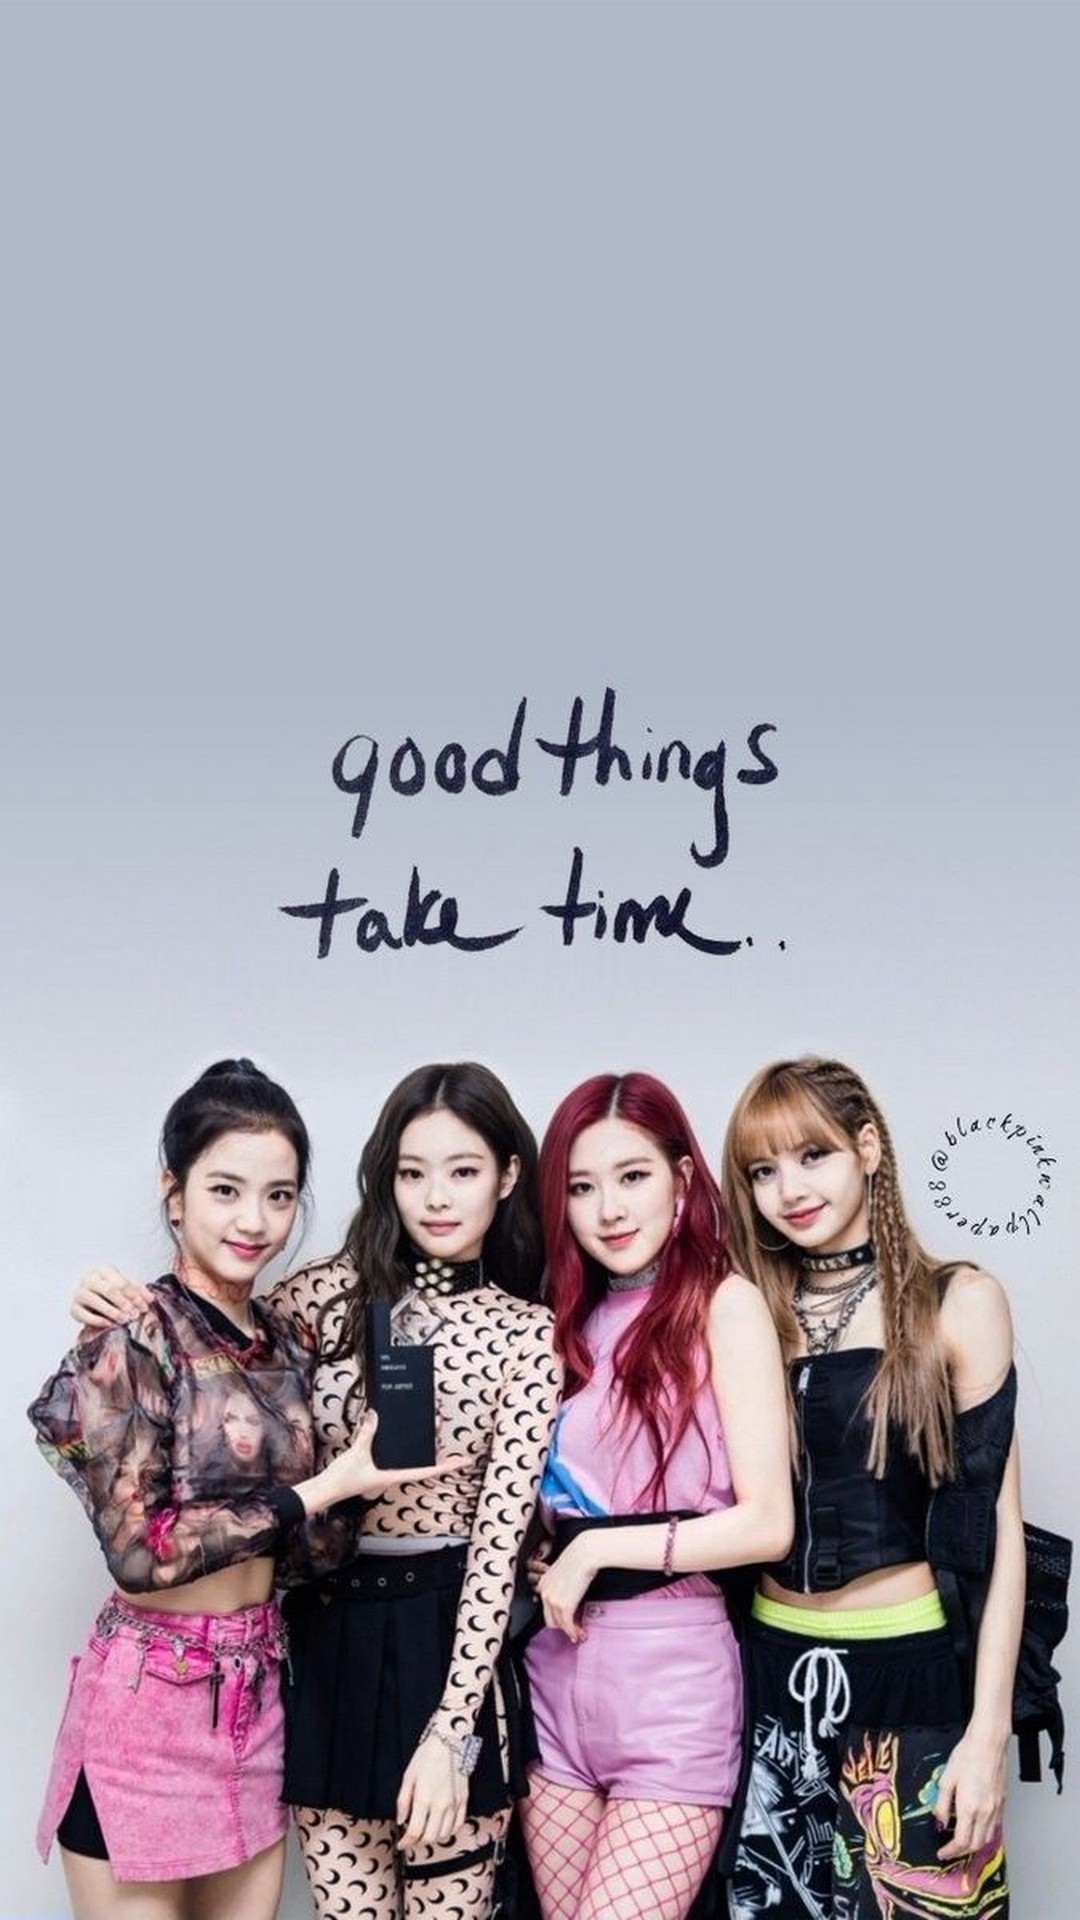 iPhone Wallpaper HD Blackpink With high-resolution 1080X1920 pixel. You can use this wallpaper for your iPhone 5, 6, 7, 8, X, XS, XR backgrounds, Mobile Screensaver, or iPad Lock Screen